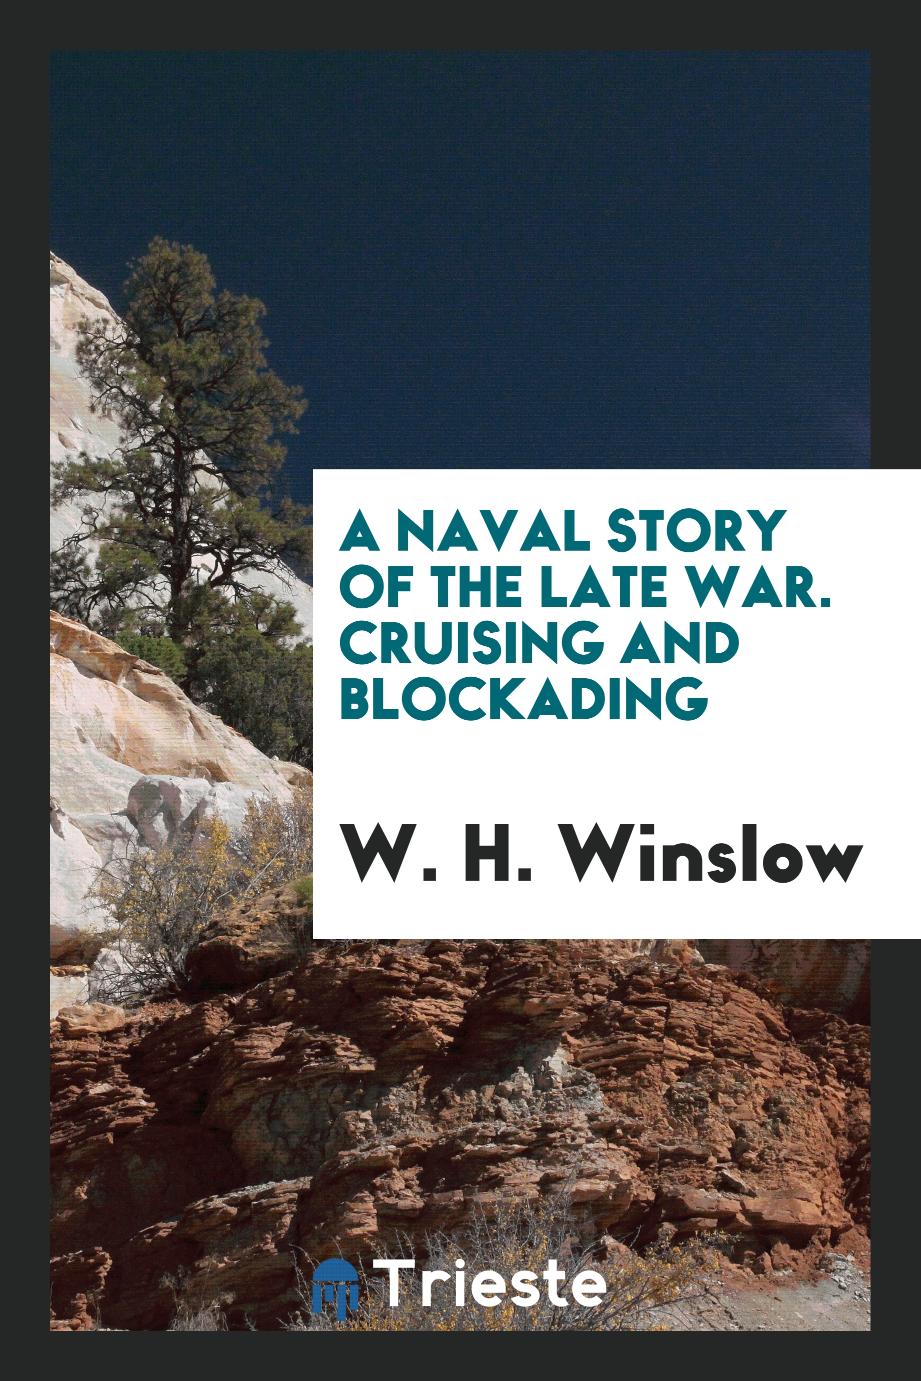 A Naval Story of the Late War. Cruising and Blockading